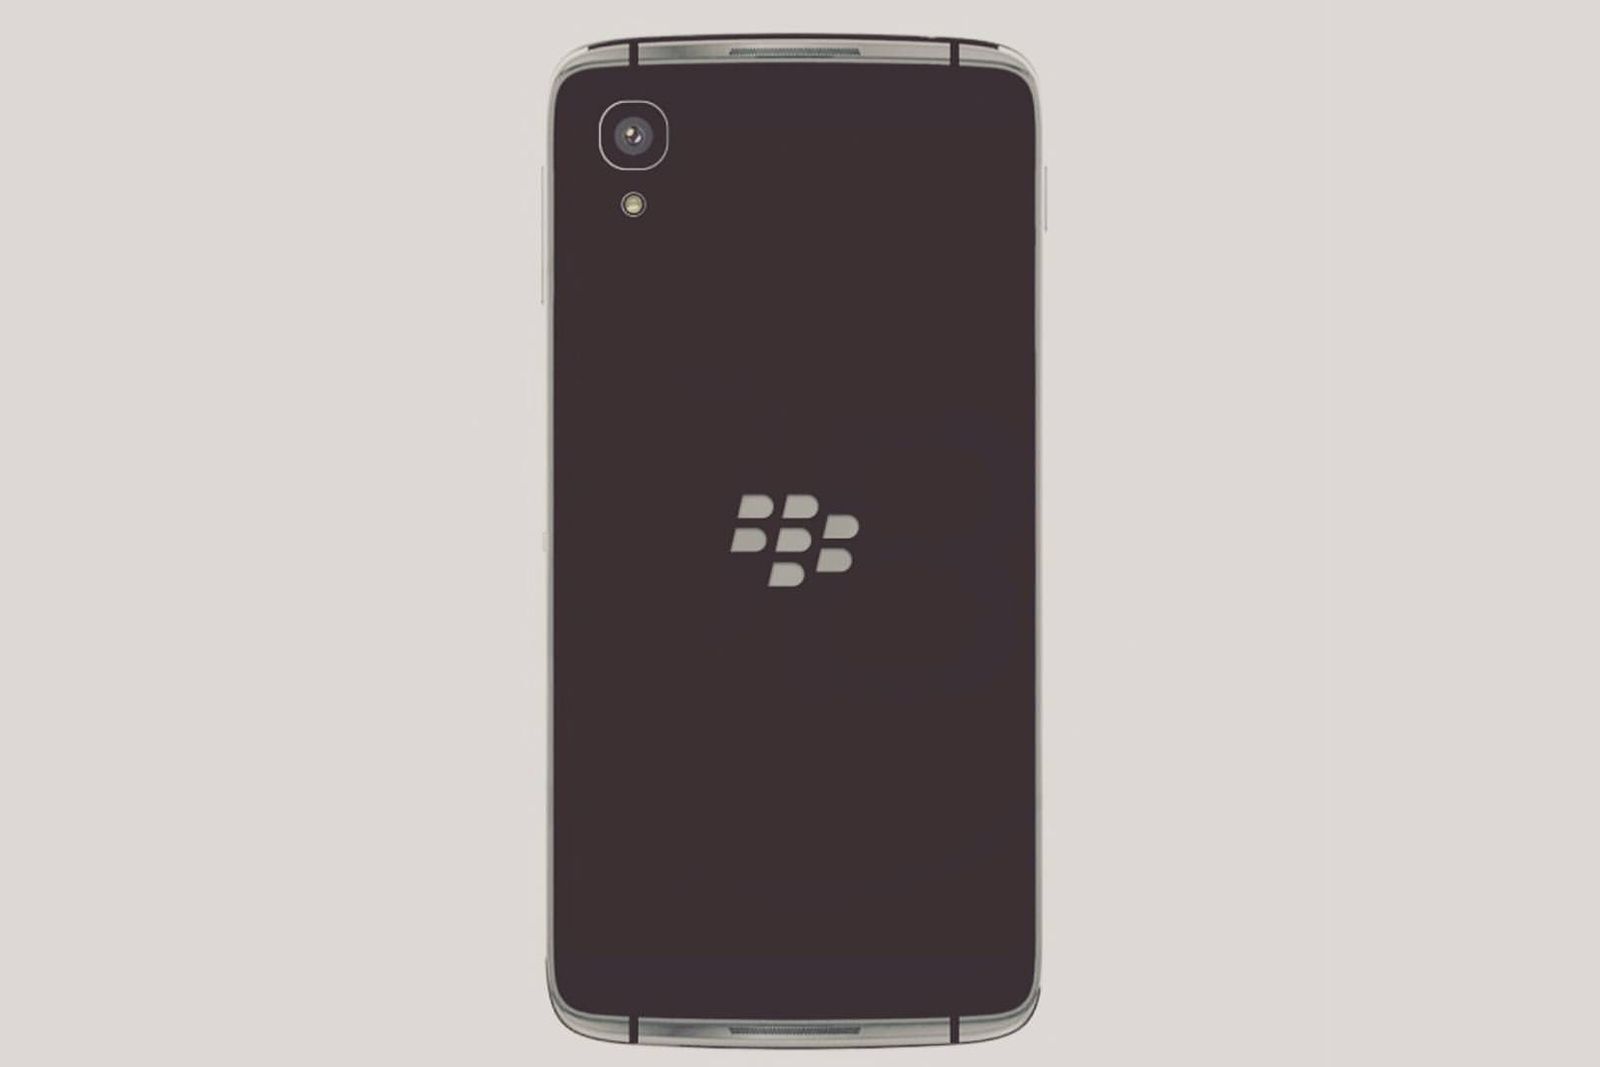 blackberry hamburg could be called blackberry neon first press picture leaks image 1